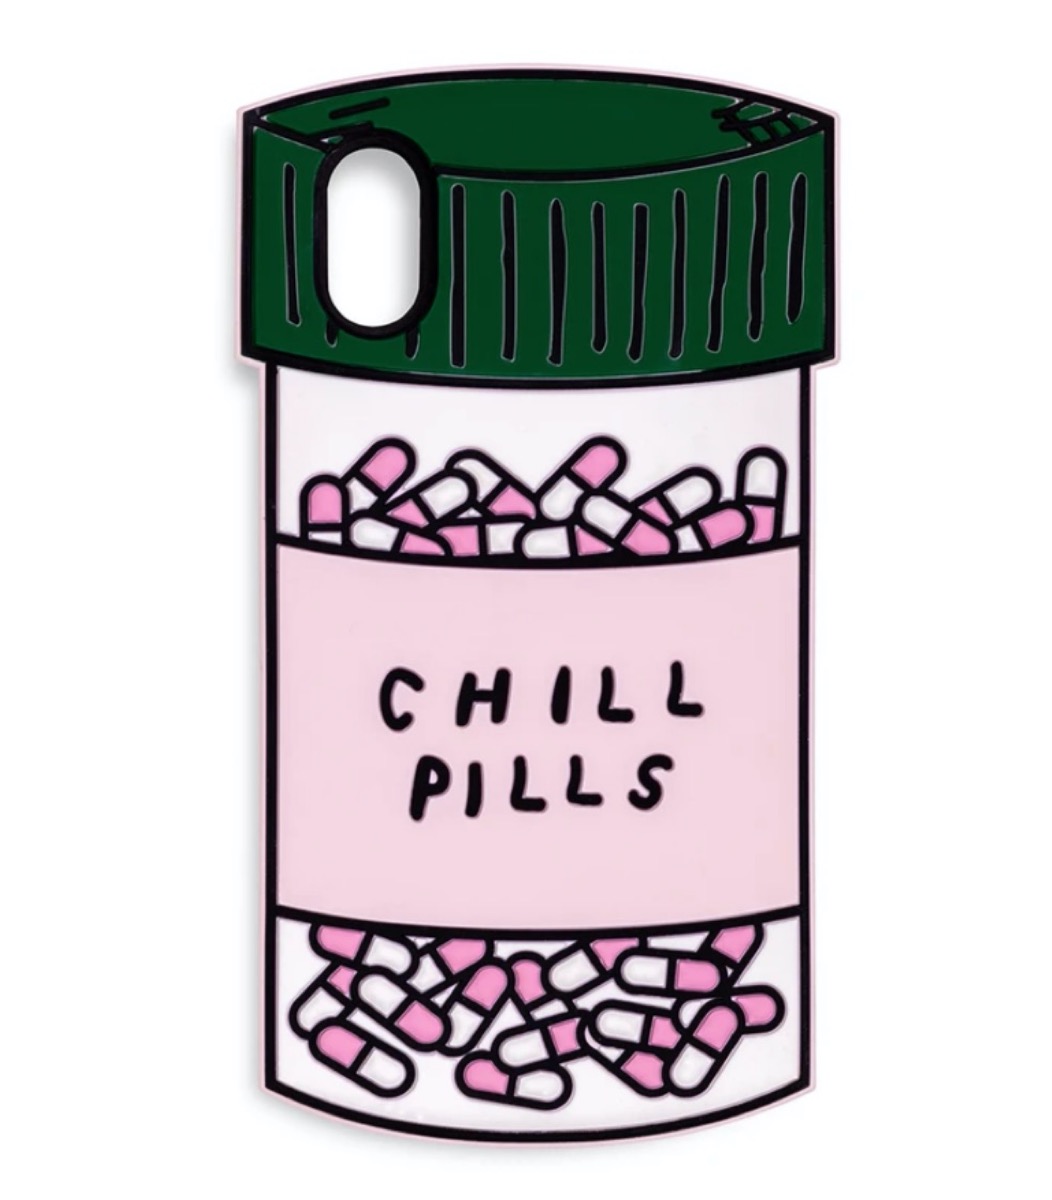 silicone phone case that looks like a pill bottle and reads "chill pills"